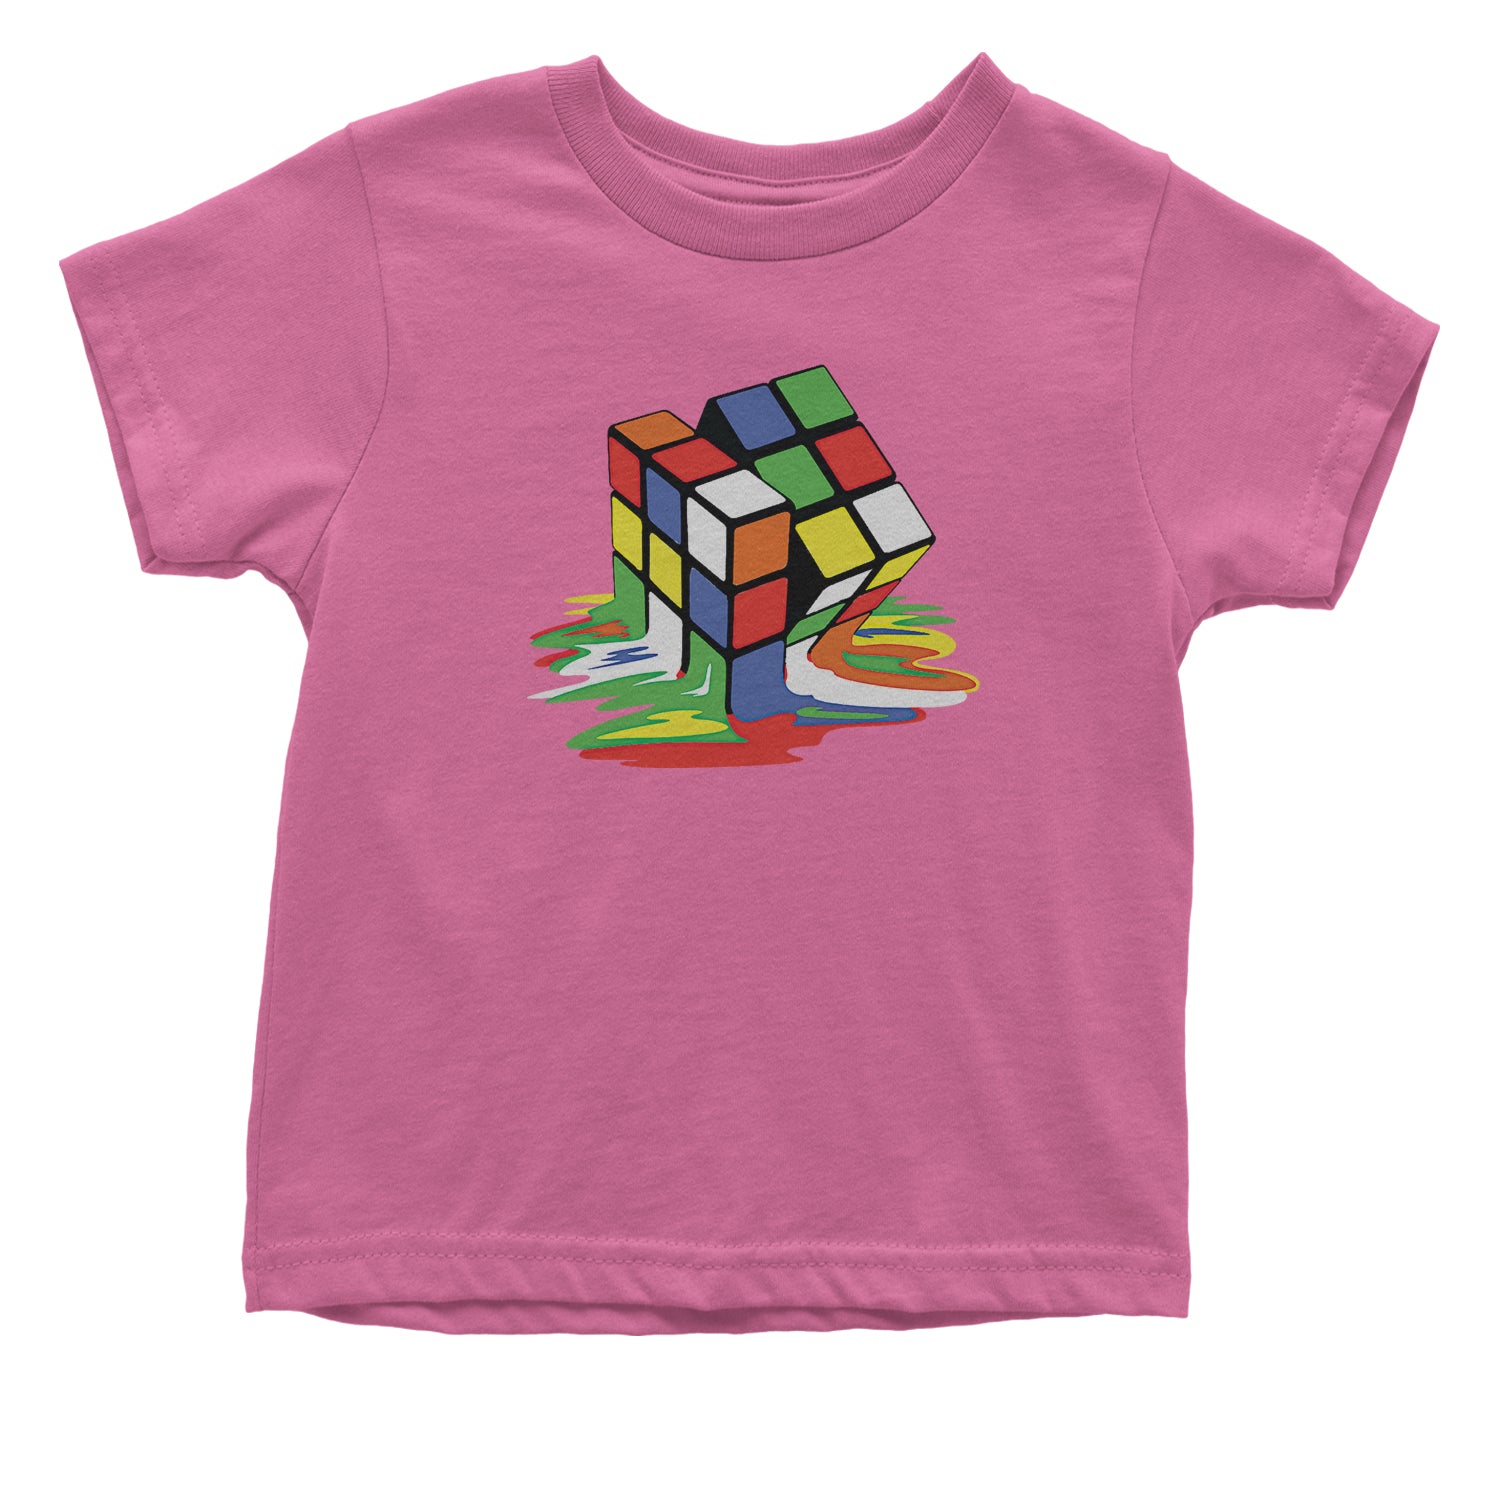 Melting Multi-Colored Cube Infant One-Piece Romper Bodysuit and Toddler T-shirt gamer, gaming, nerd, shirt by Expression Tees